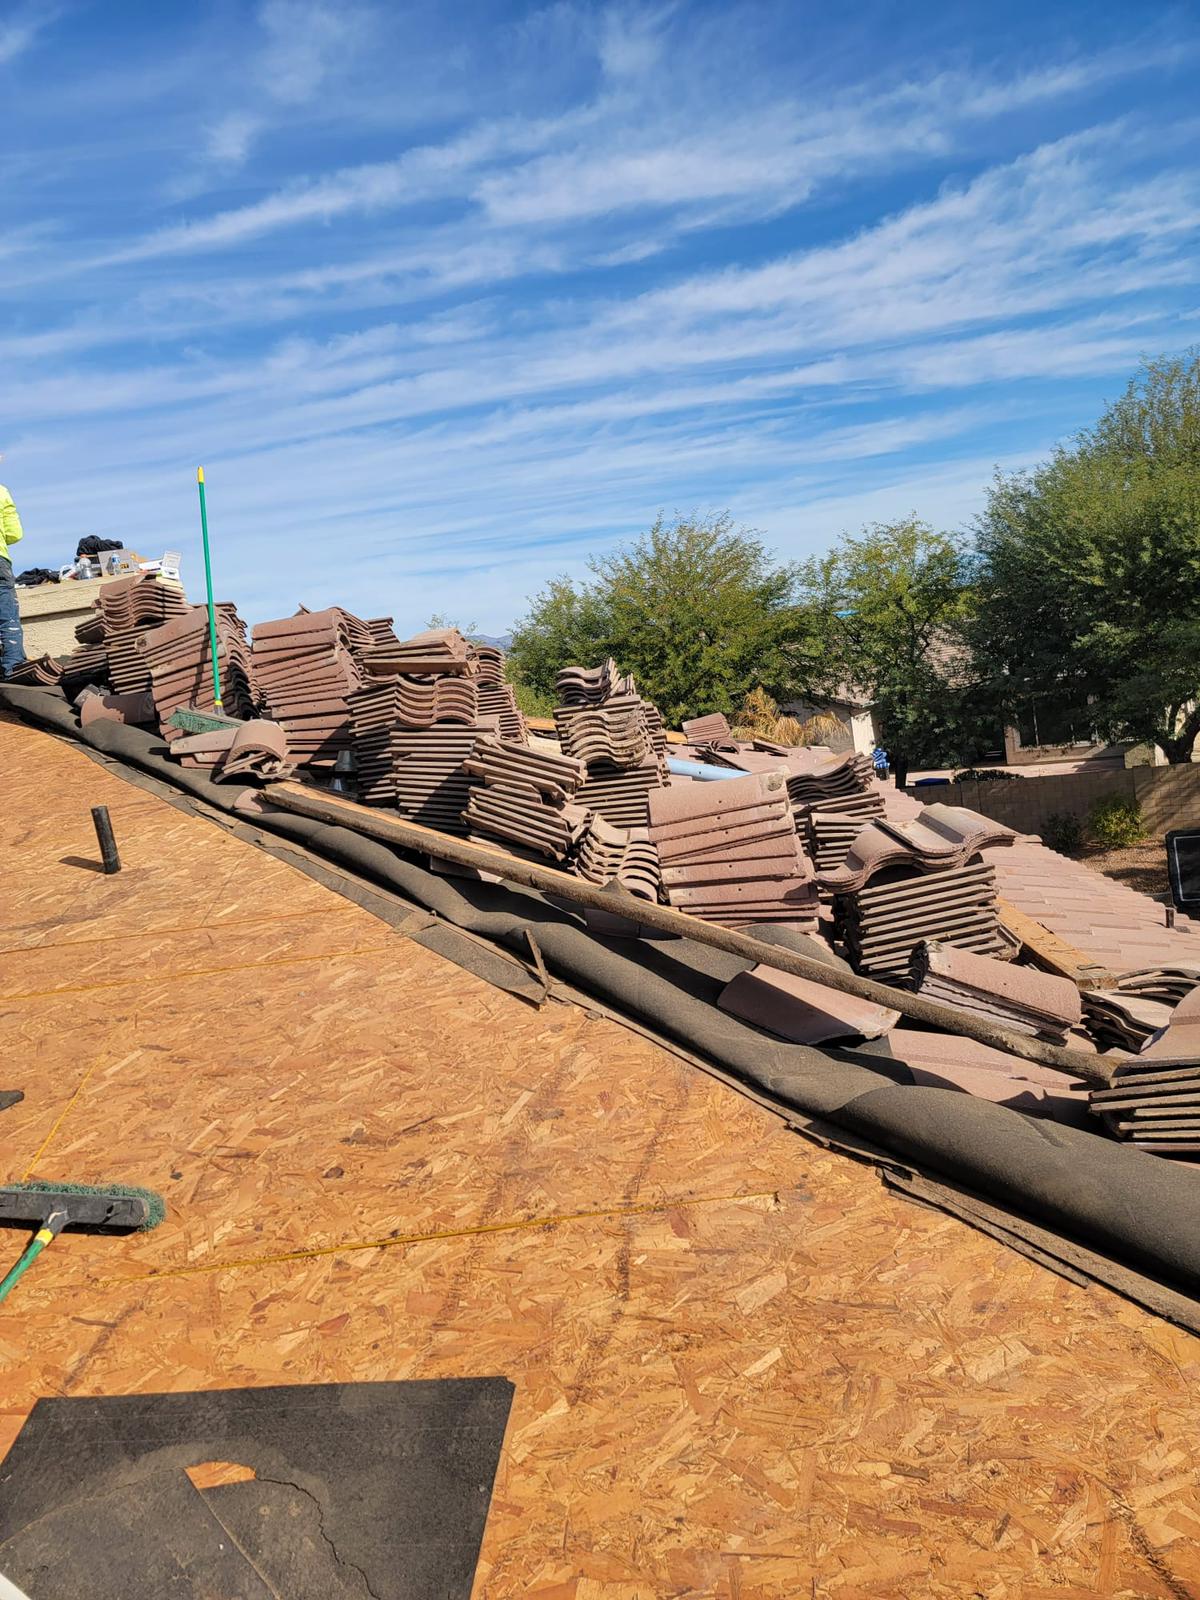 Ready for installation, these tiles are part of a Behmer Roofing tile re-felt project on a beautiful Gilbert day.